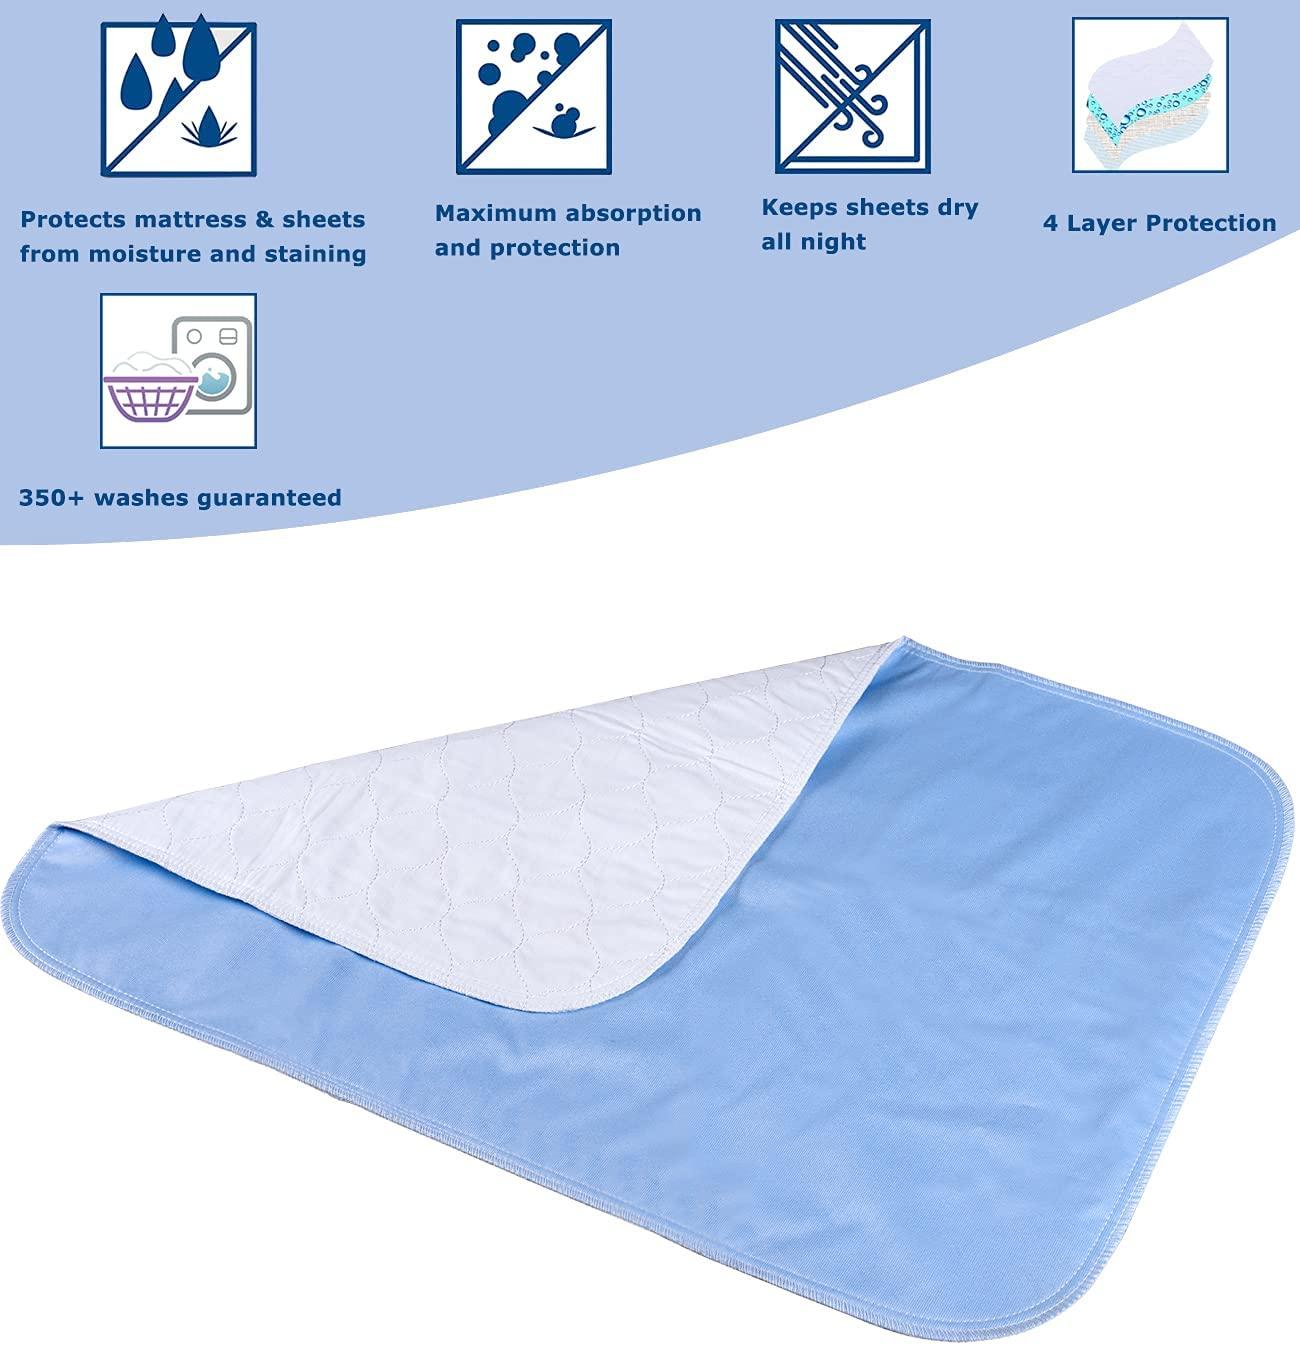 Non-Slip Bed Pads for Incontinence Washable (28 x 36|2 Pack),Waterproof  Bed Pads,Adult Washable Incontinence Bed Pads for Adults,Dog,Kids